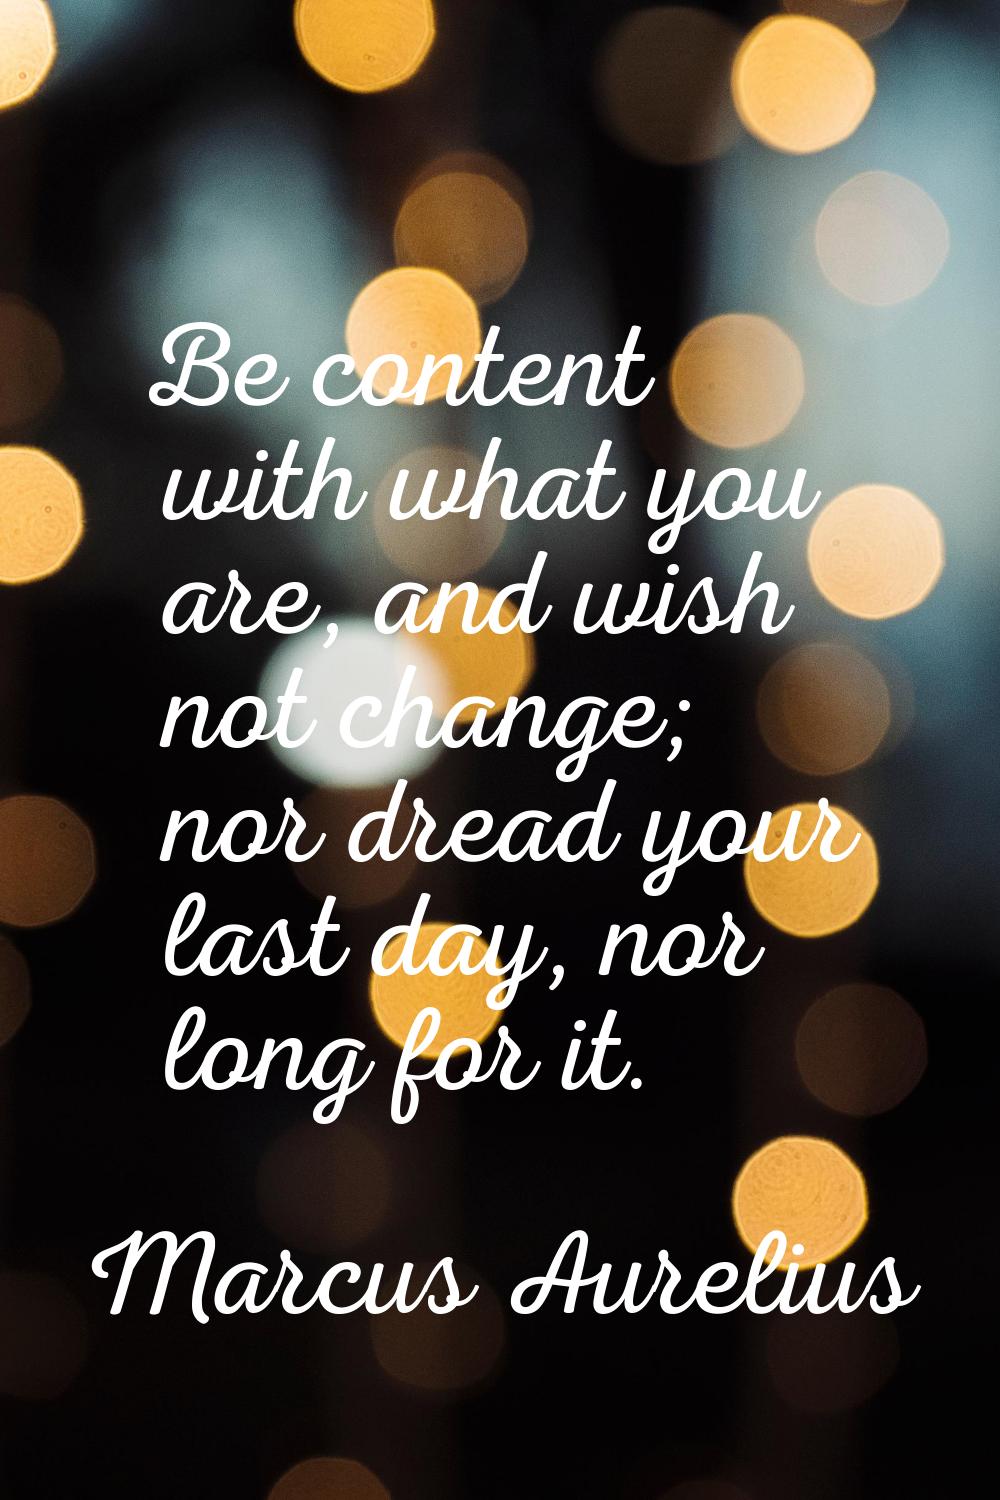 Be content with what you are, and wish not change; nor dread your last day, nor long for it.